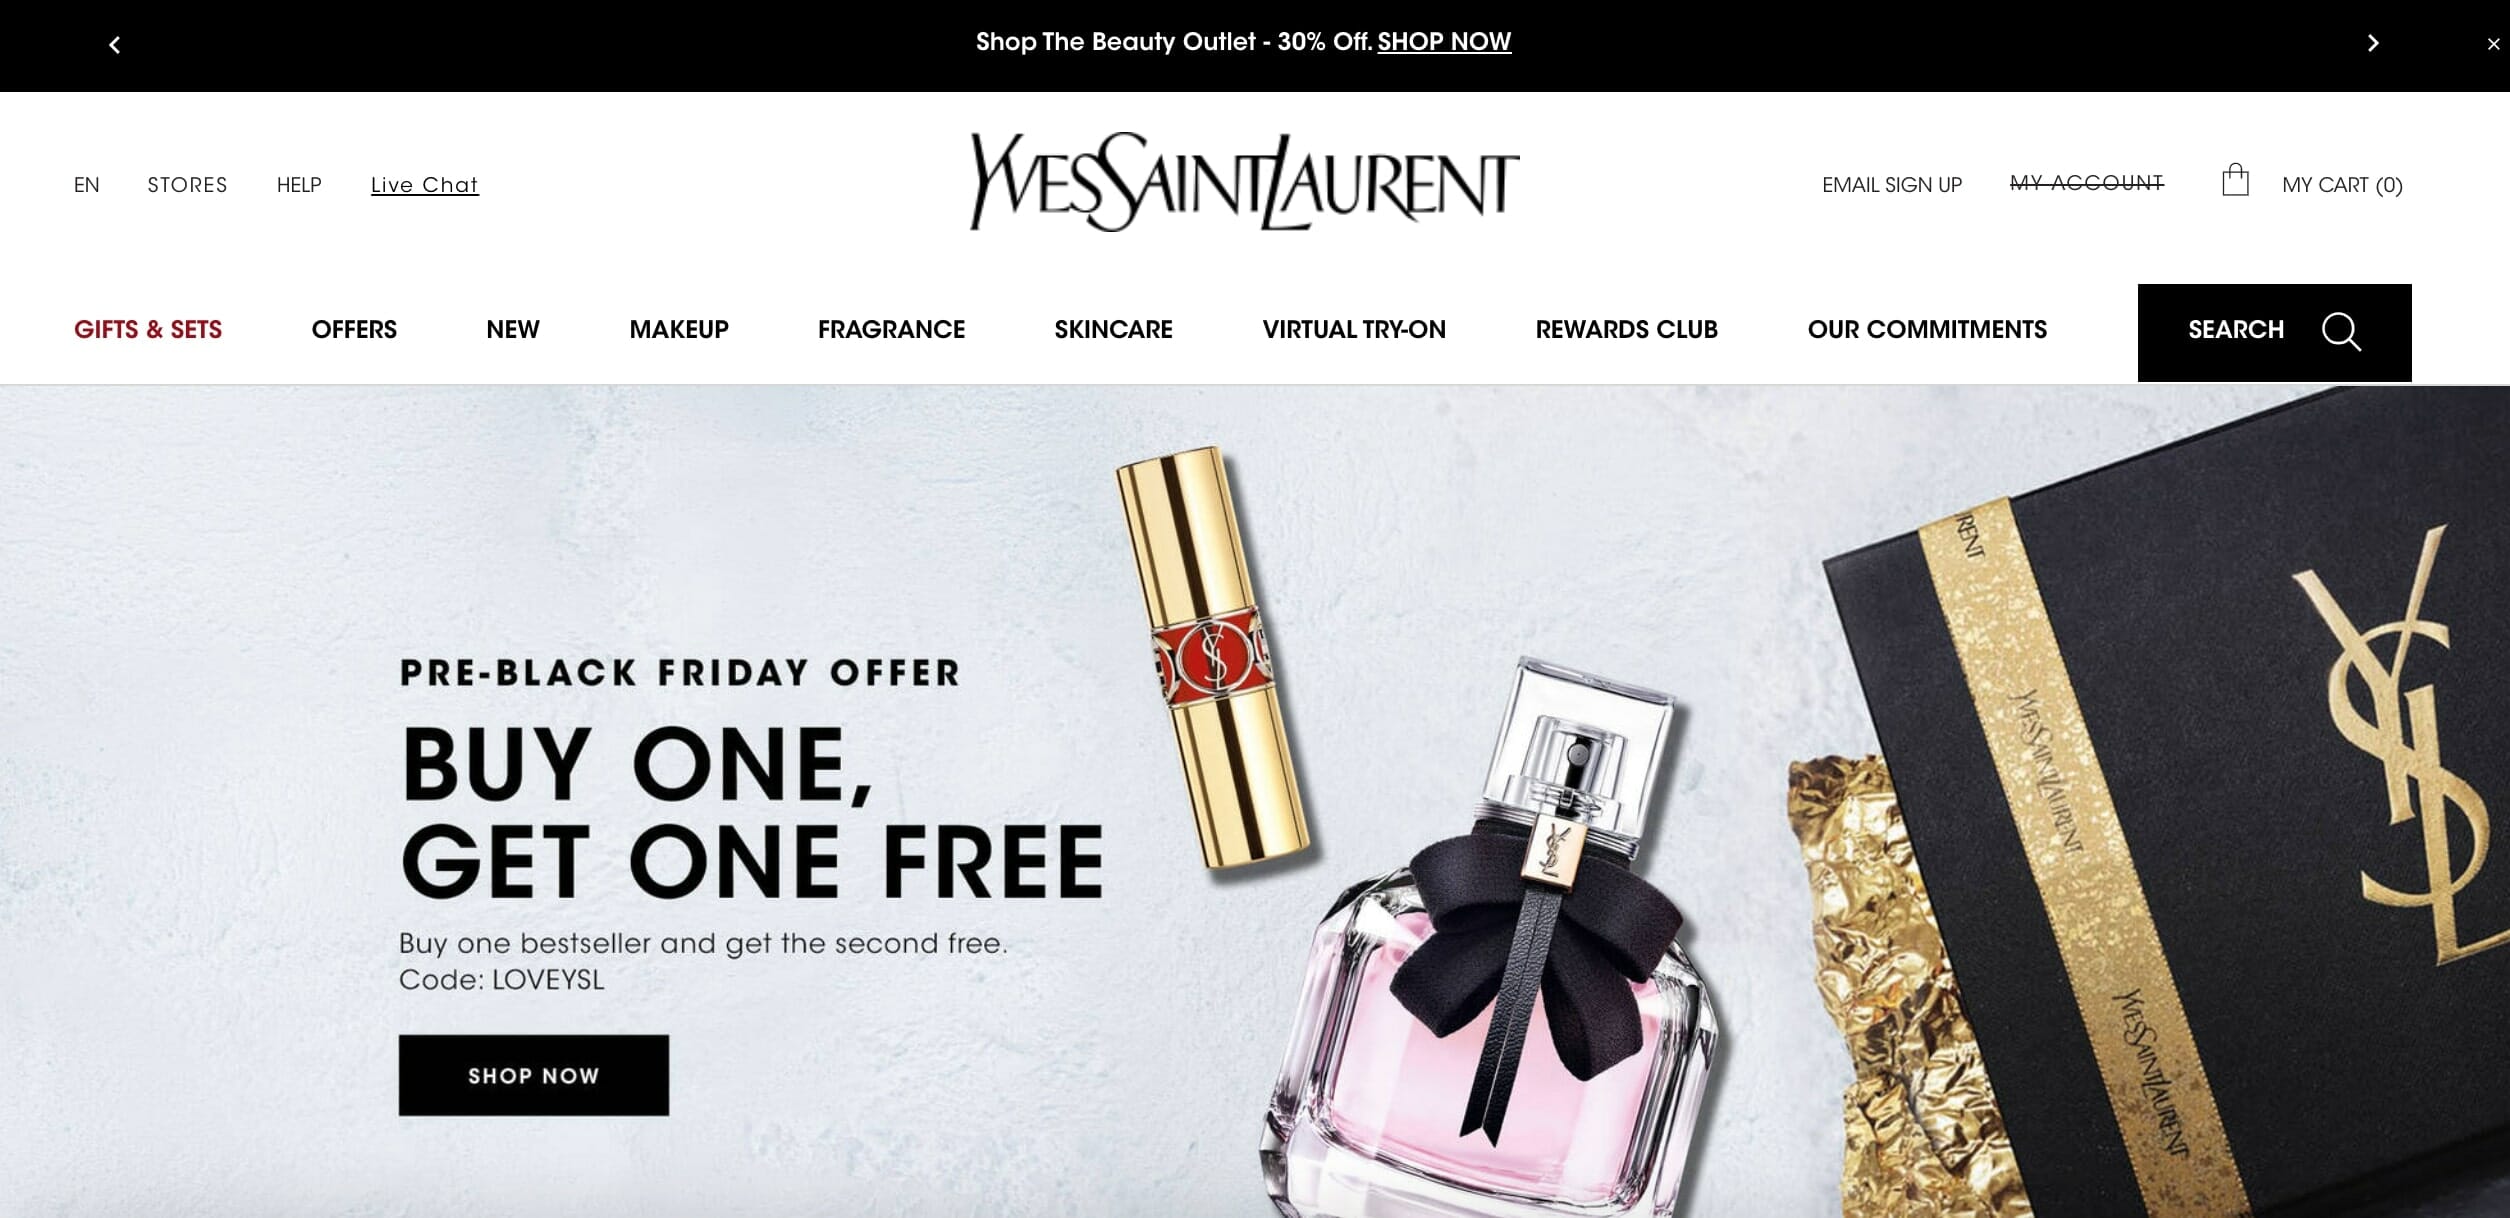 The YSL Beauty advent calendar features beauty bestsellers and